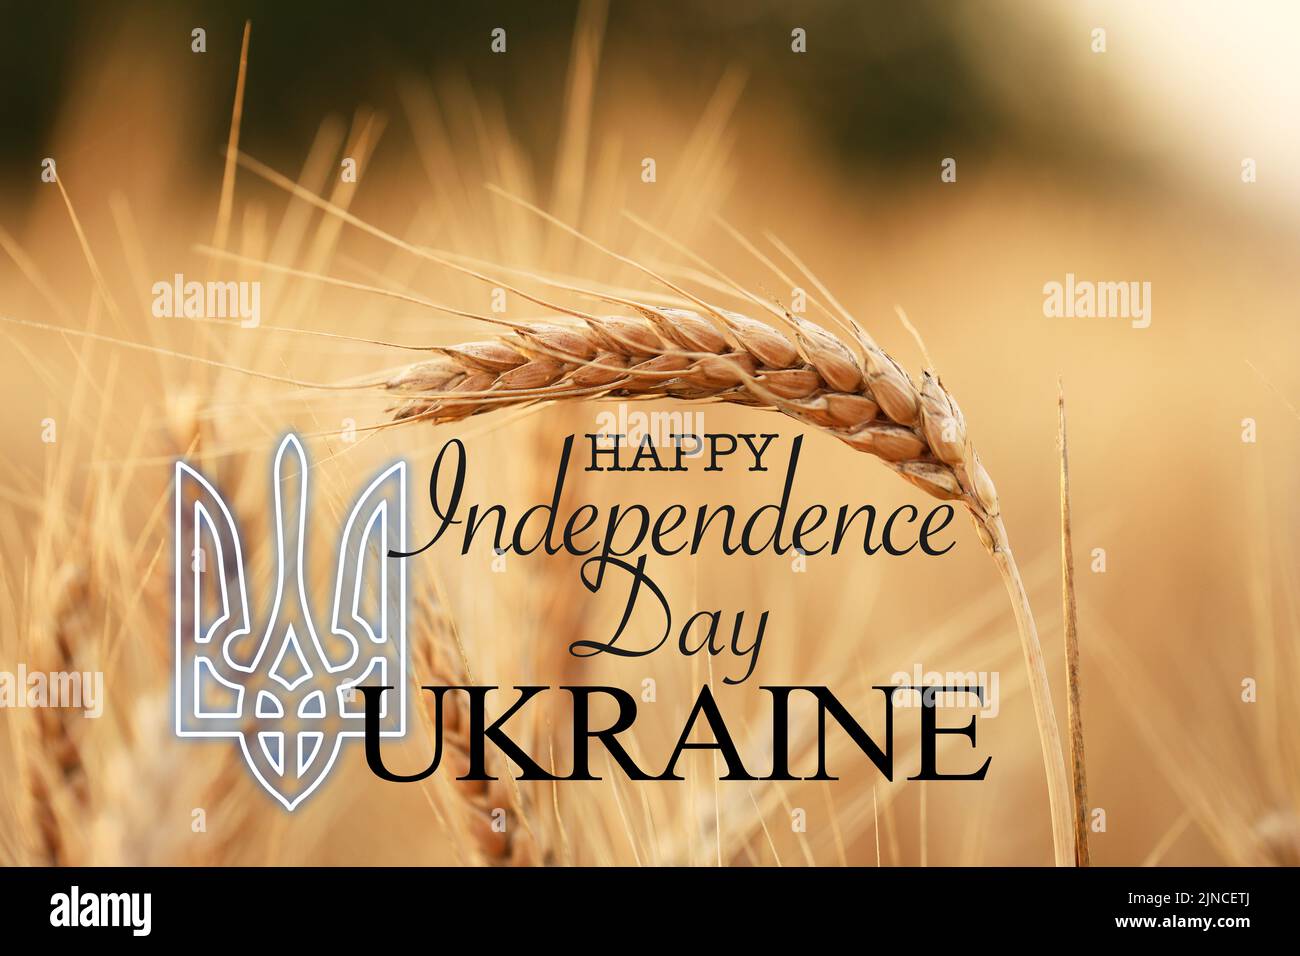 Poster for Ukrainian Independence Day with wheat field Stock Photo